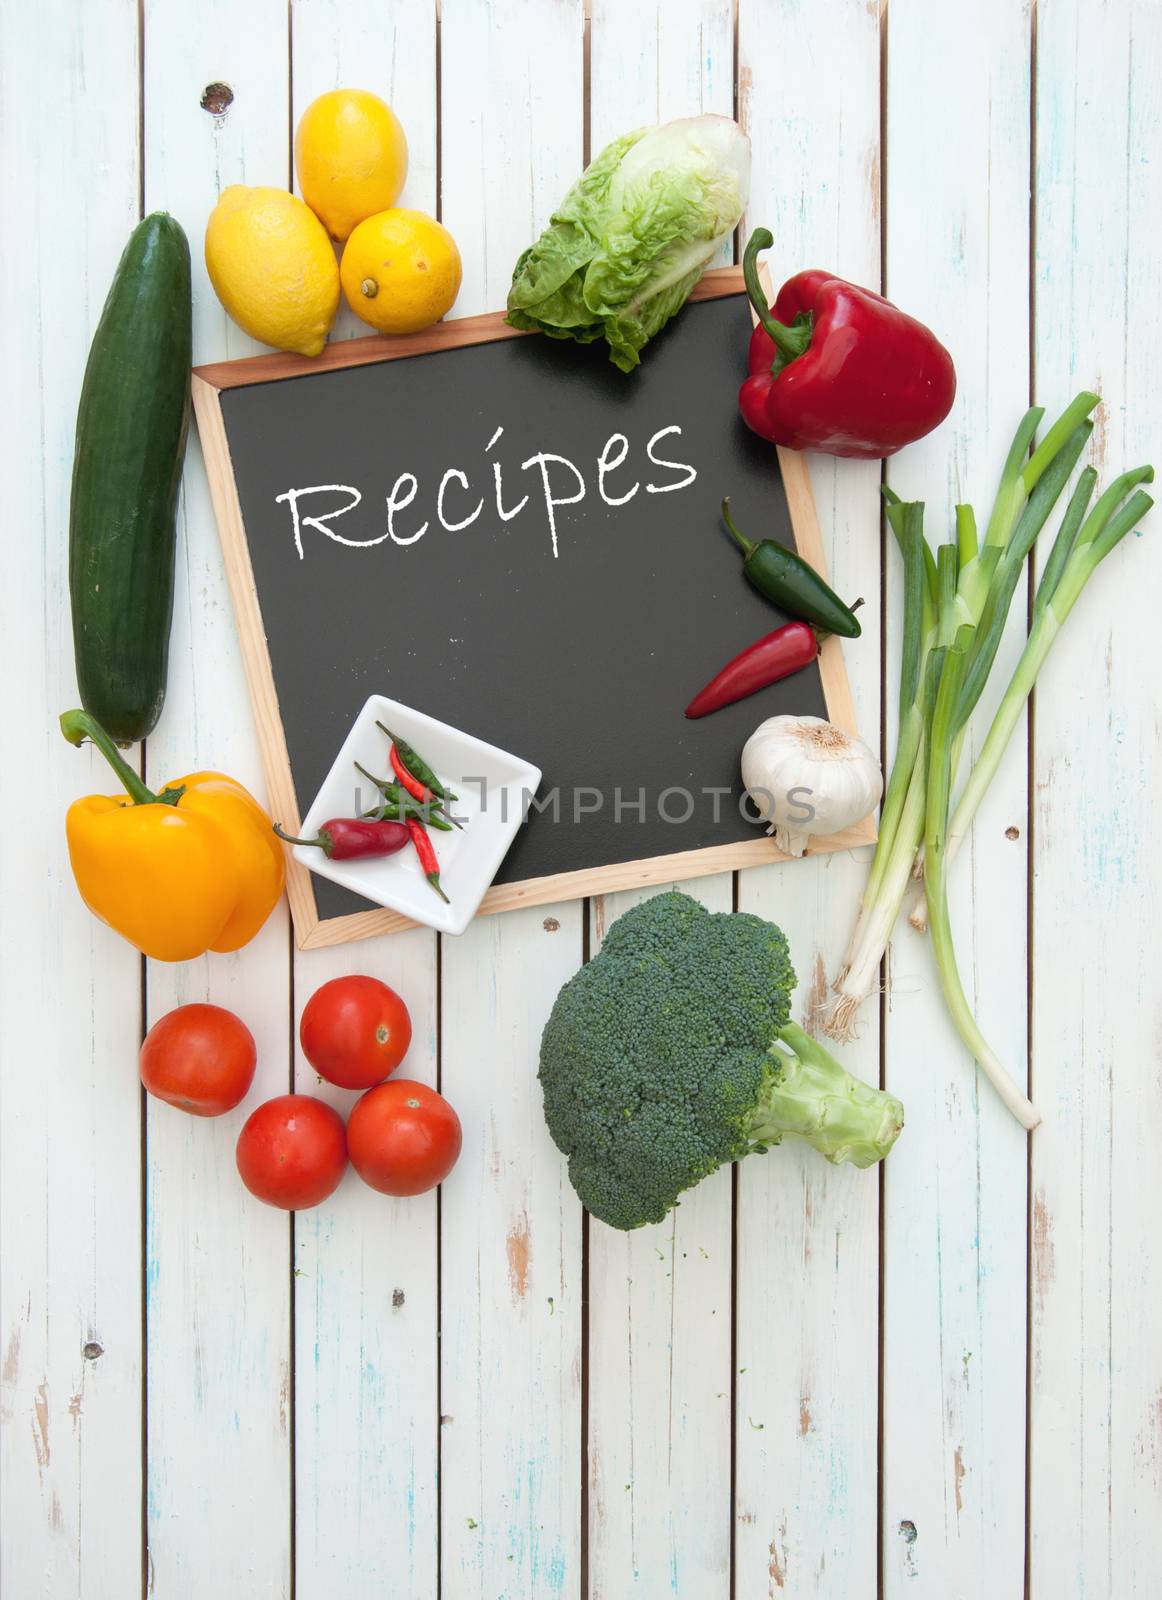 Recipes handwritten on a chalkboard surrounded by fresh ingredients 